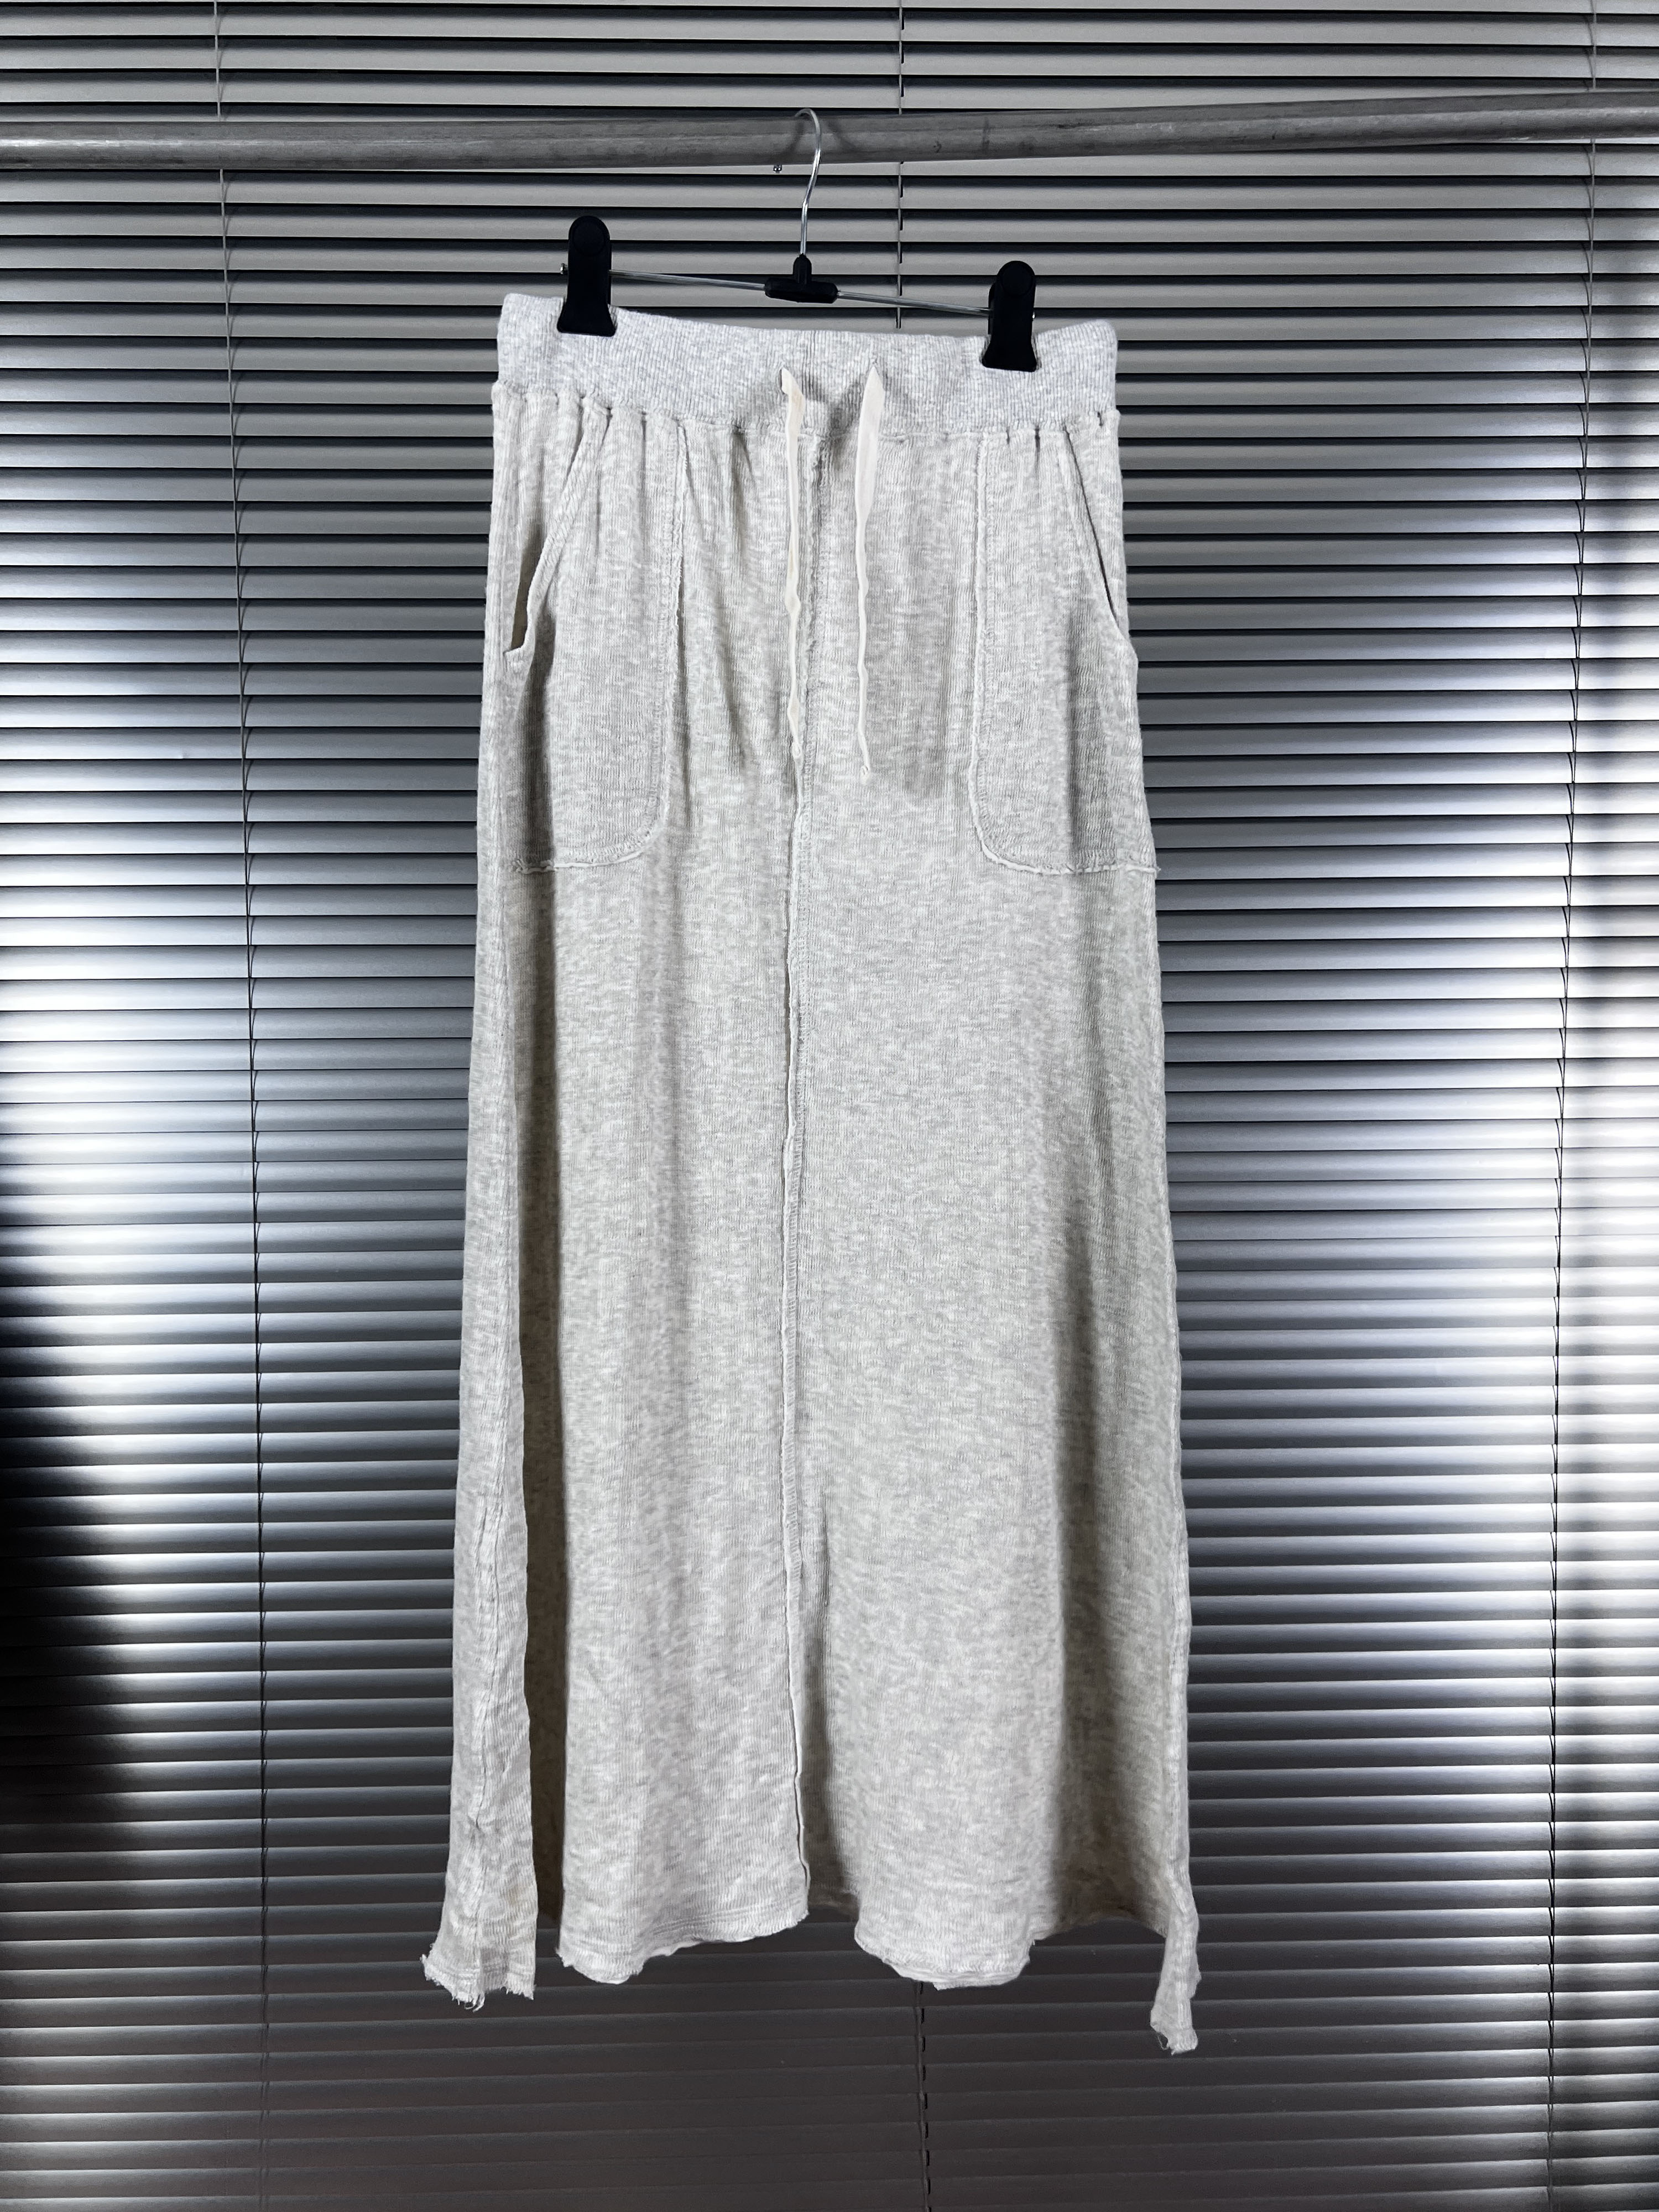 inside-out sweat skirts